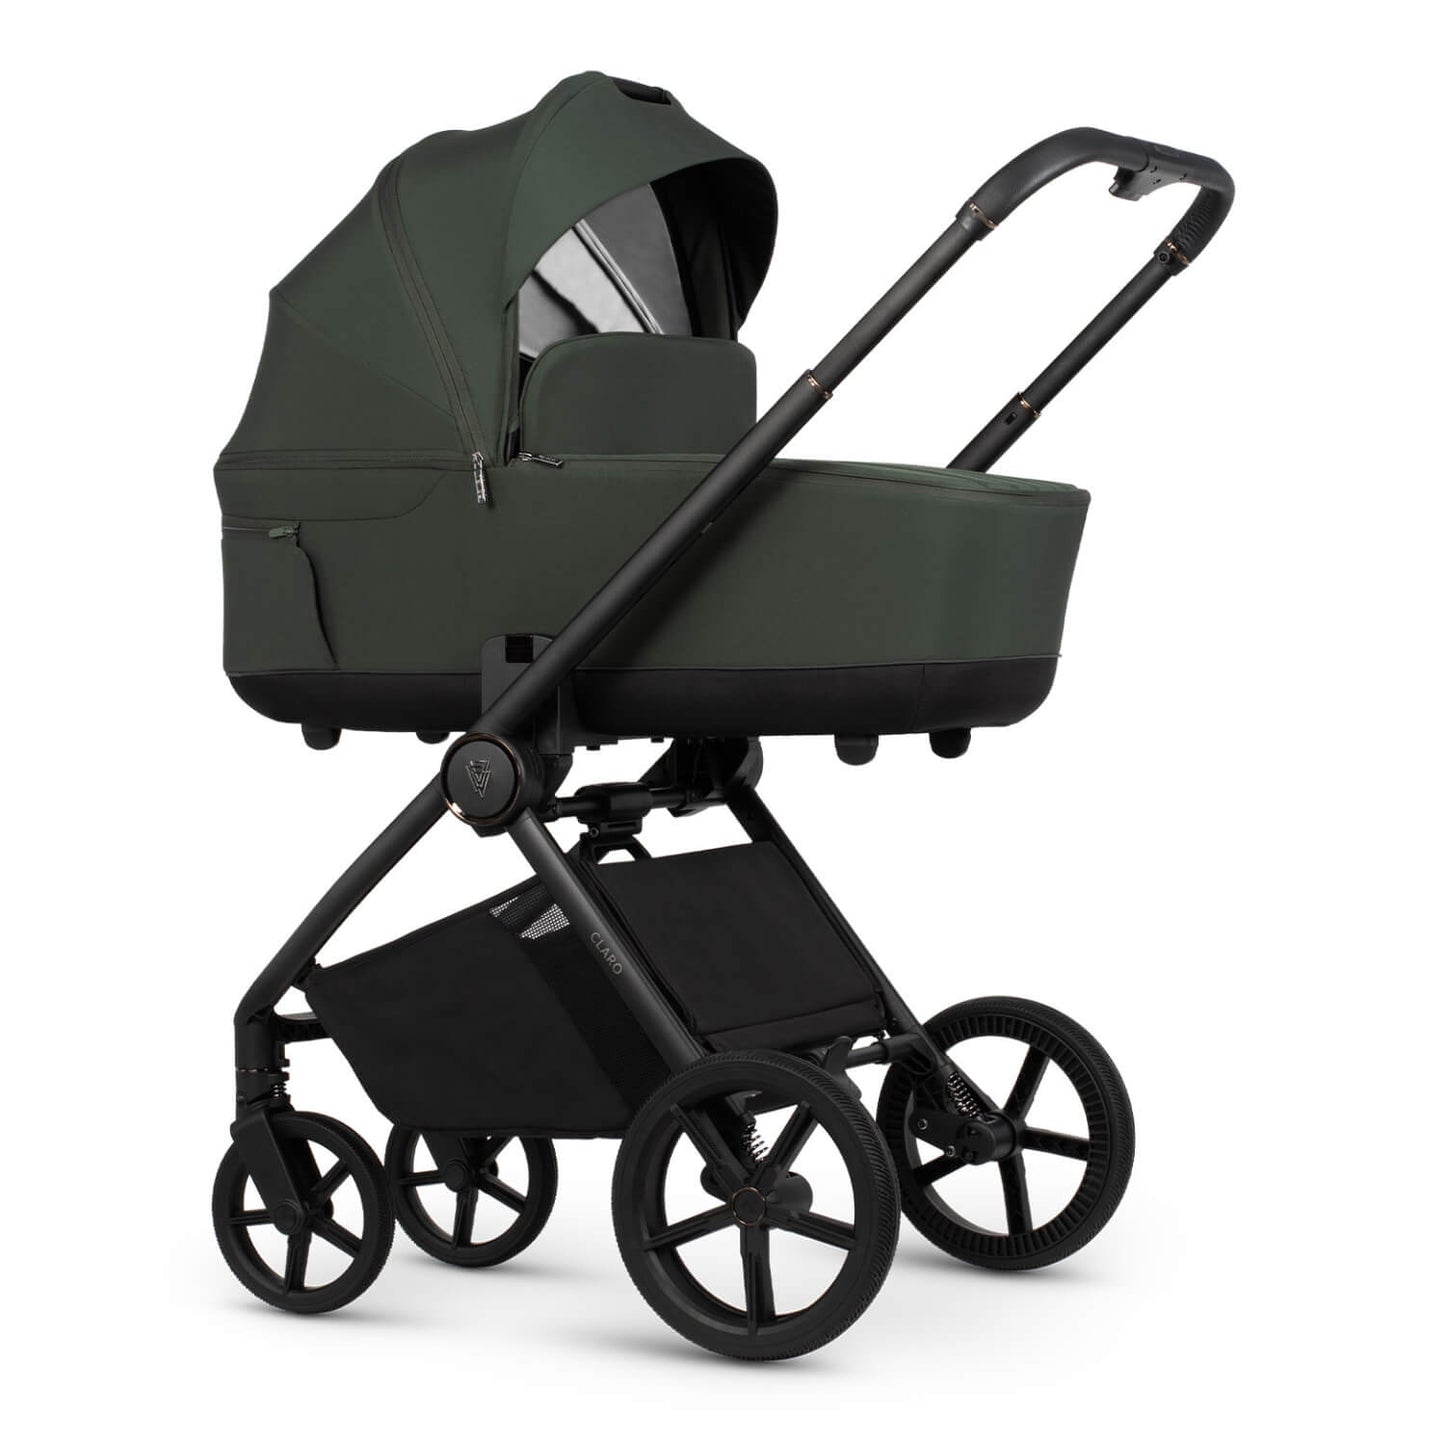 Venicci Claro 3-in-1 Travel System with carrycot in Forest green colour